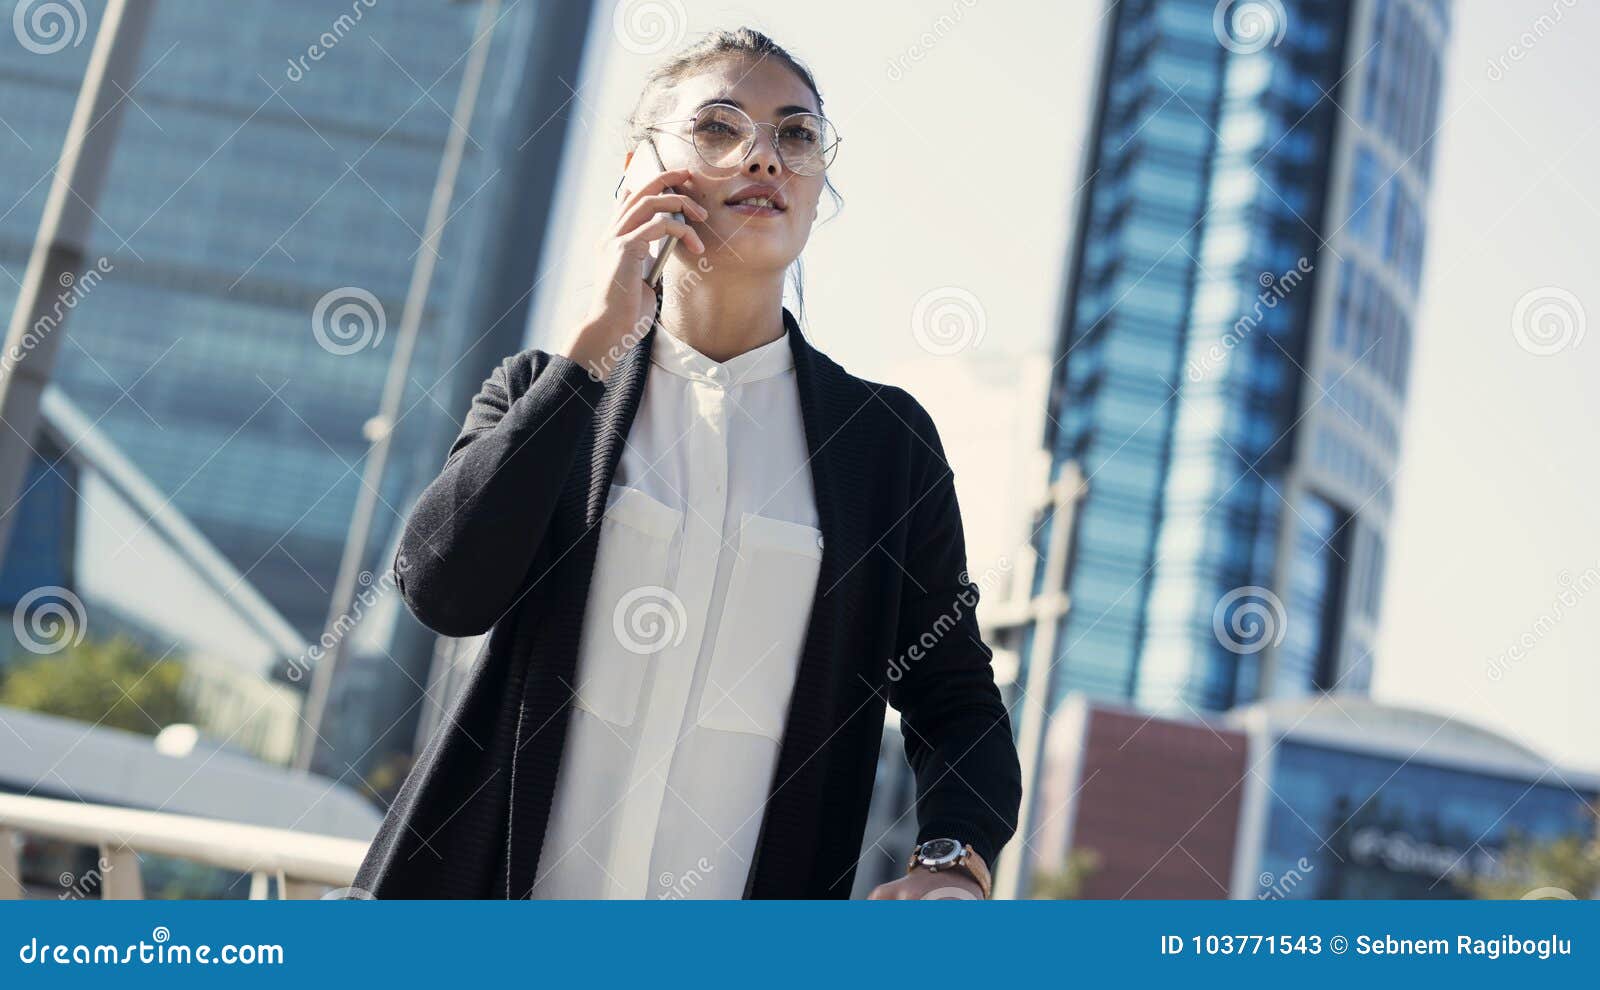 Businesswoman Talking Mobile Phone in the Outdoors Stock Image - Image ...